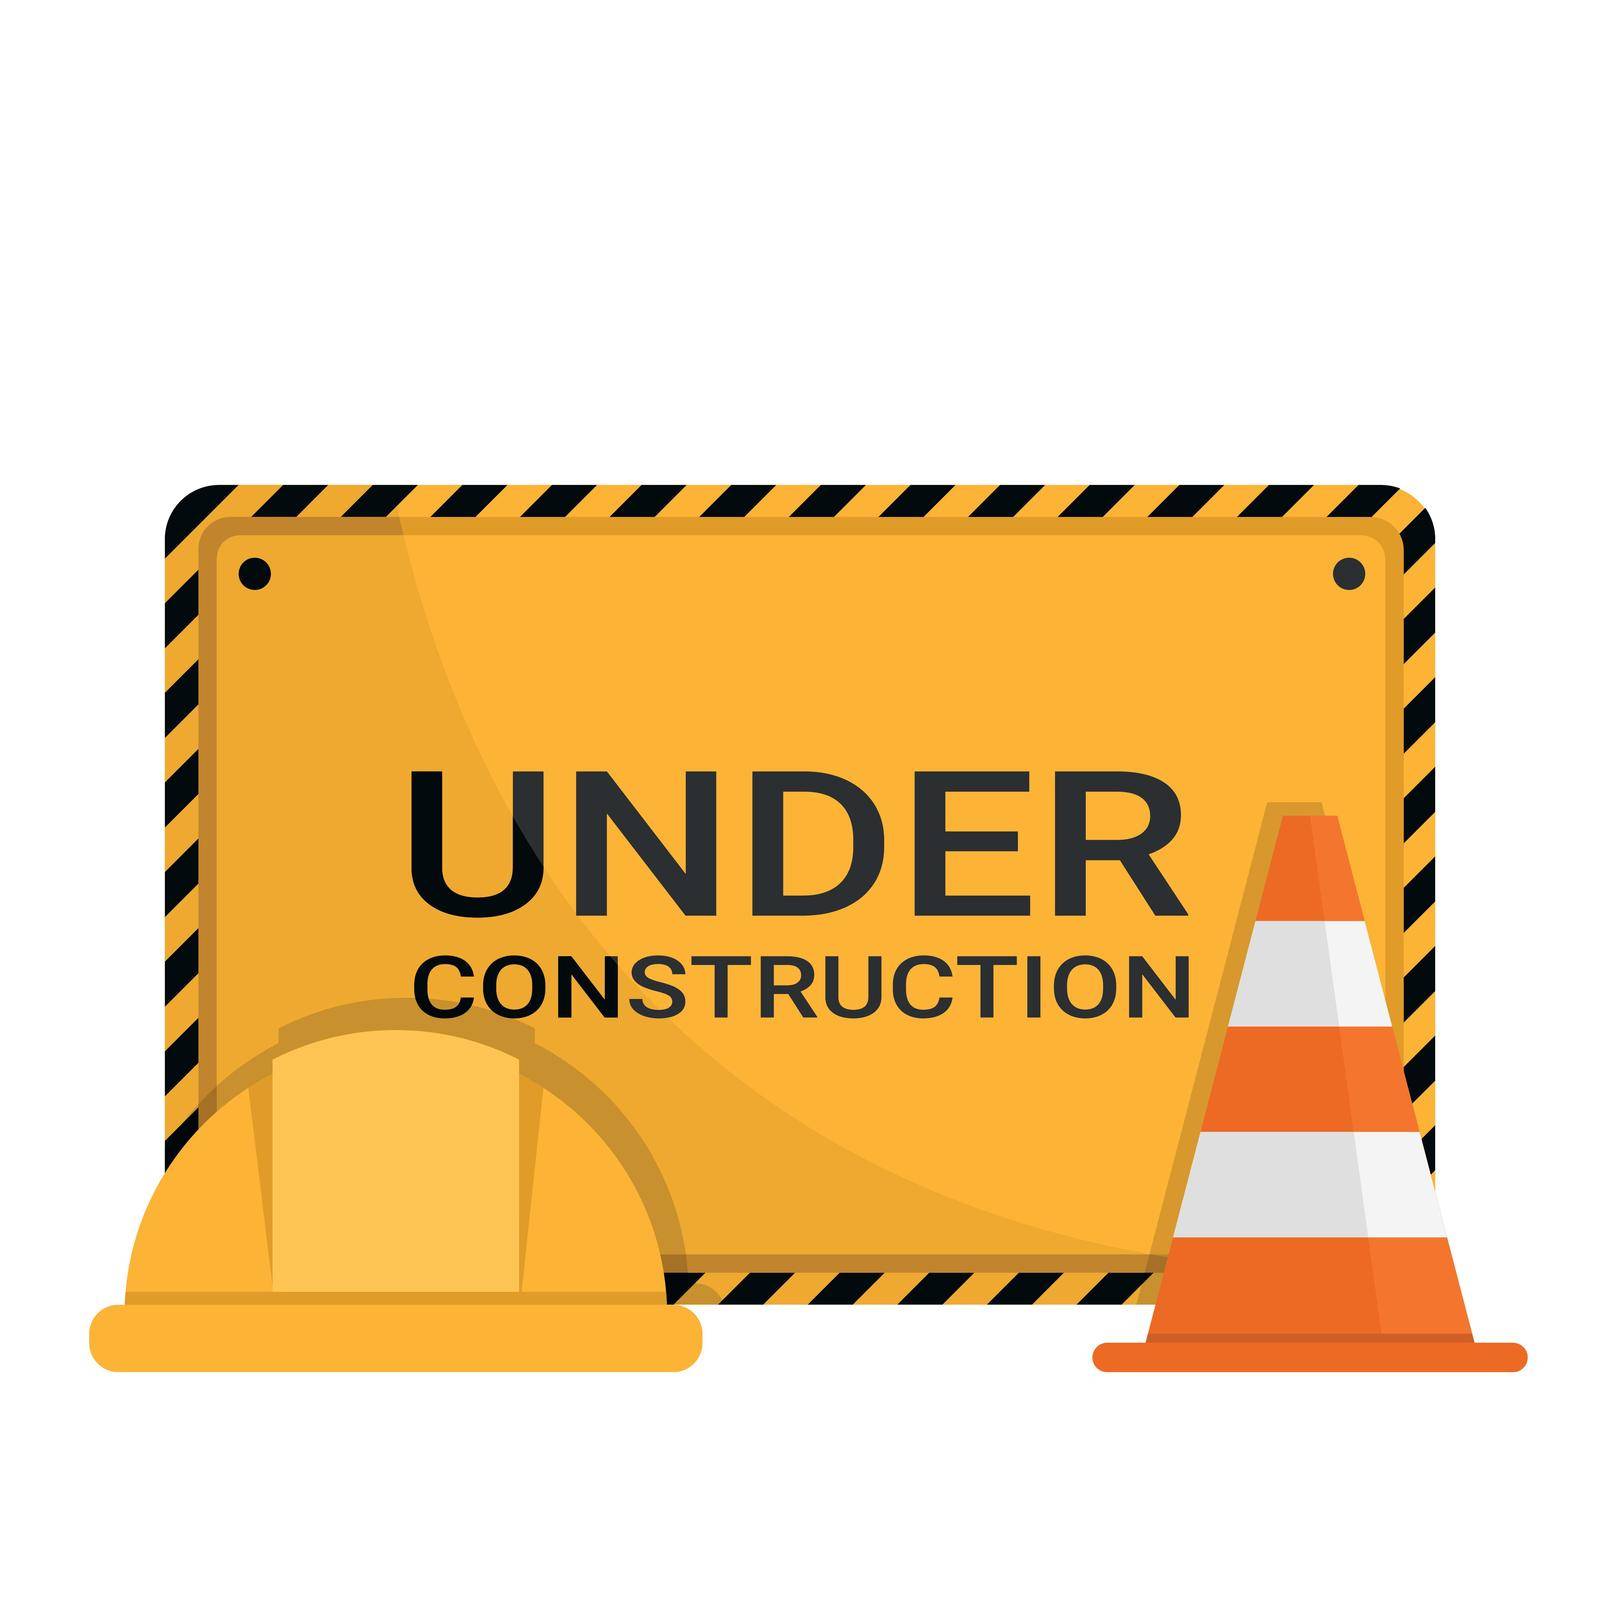 Under construction advertising sign with safety cone and safety helmet by Ipajoel